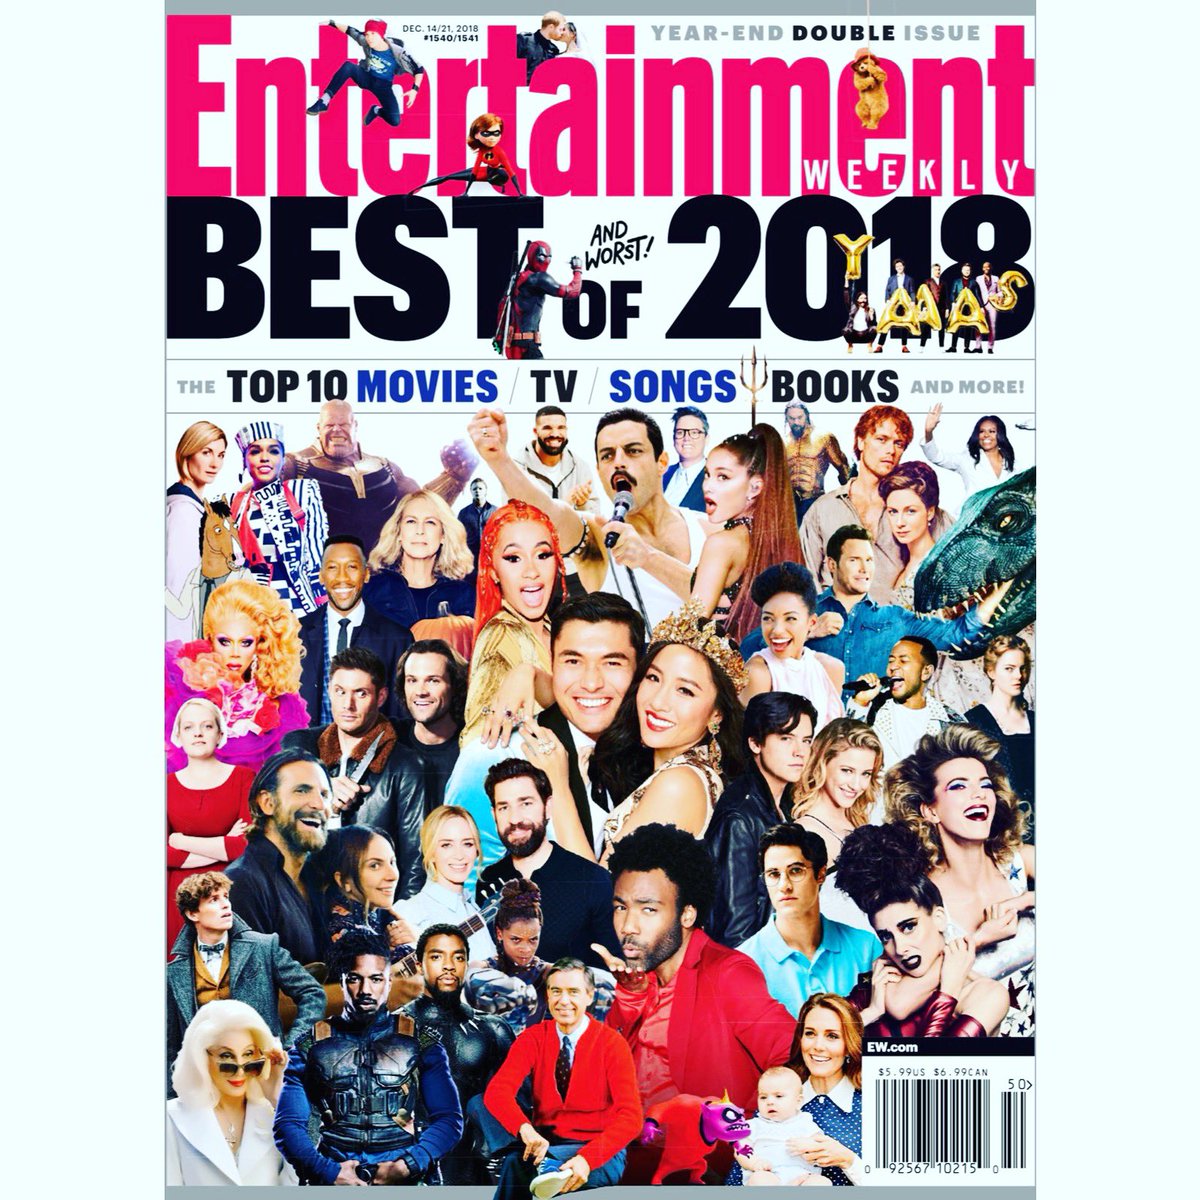 Jamie Lee Curtis On Twitter Well Now Entertainmentweekly What A Wonderful Way To Ring Out This Astonishing Year With My Inclusion On Your Year End Cover Halloweenmovie Proud To Represent Missjudygreer Your